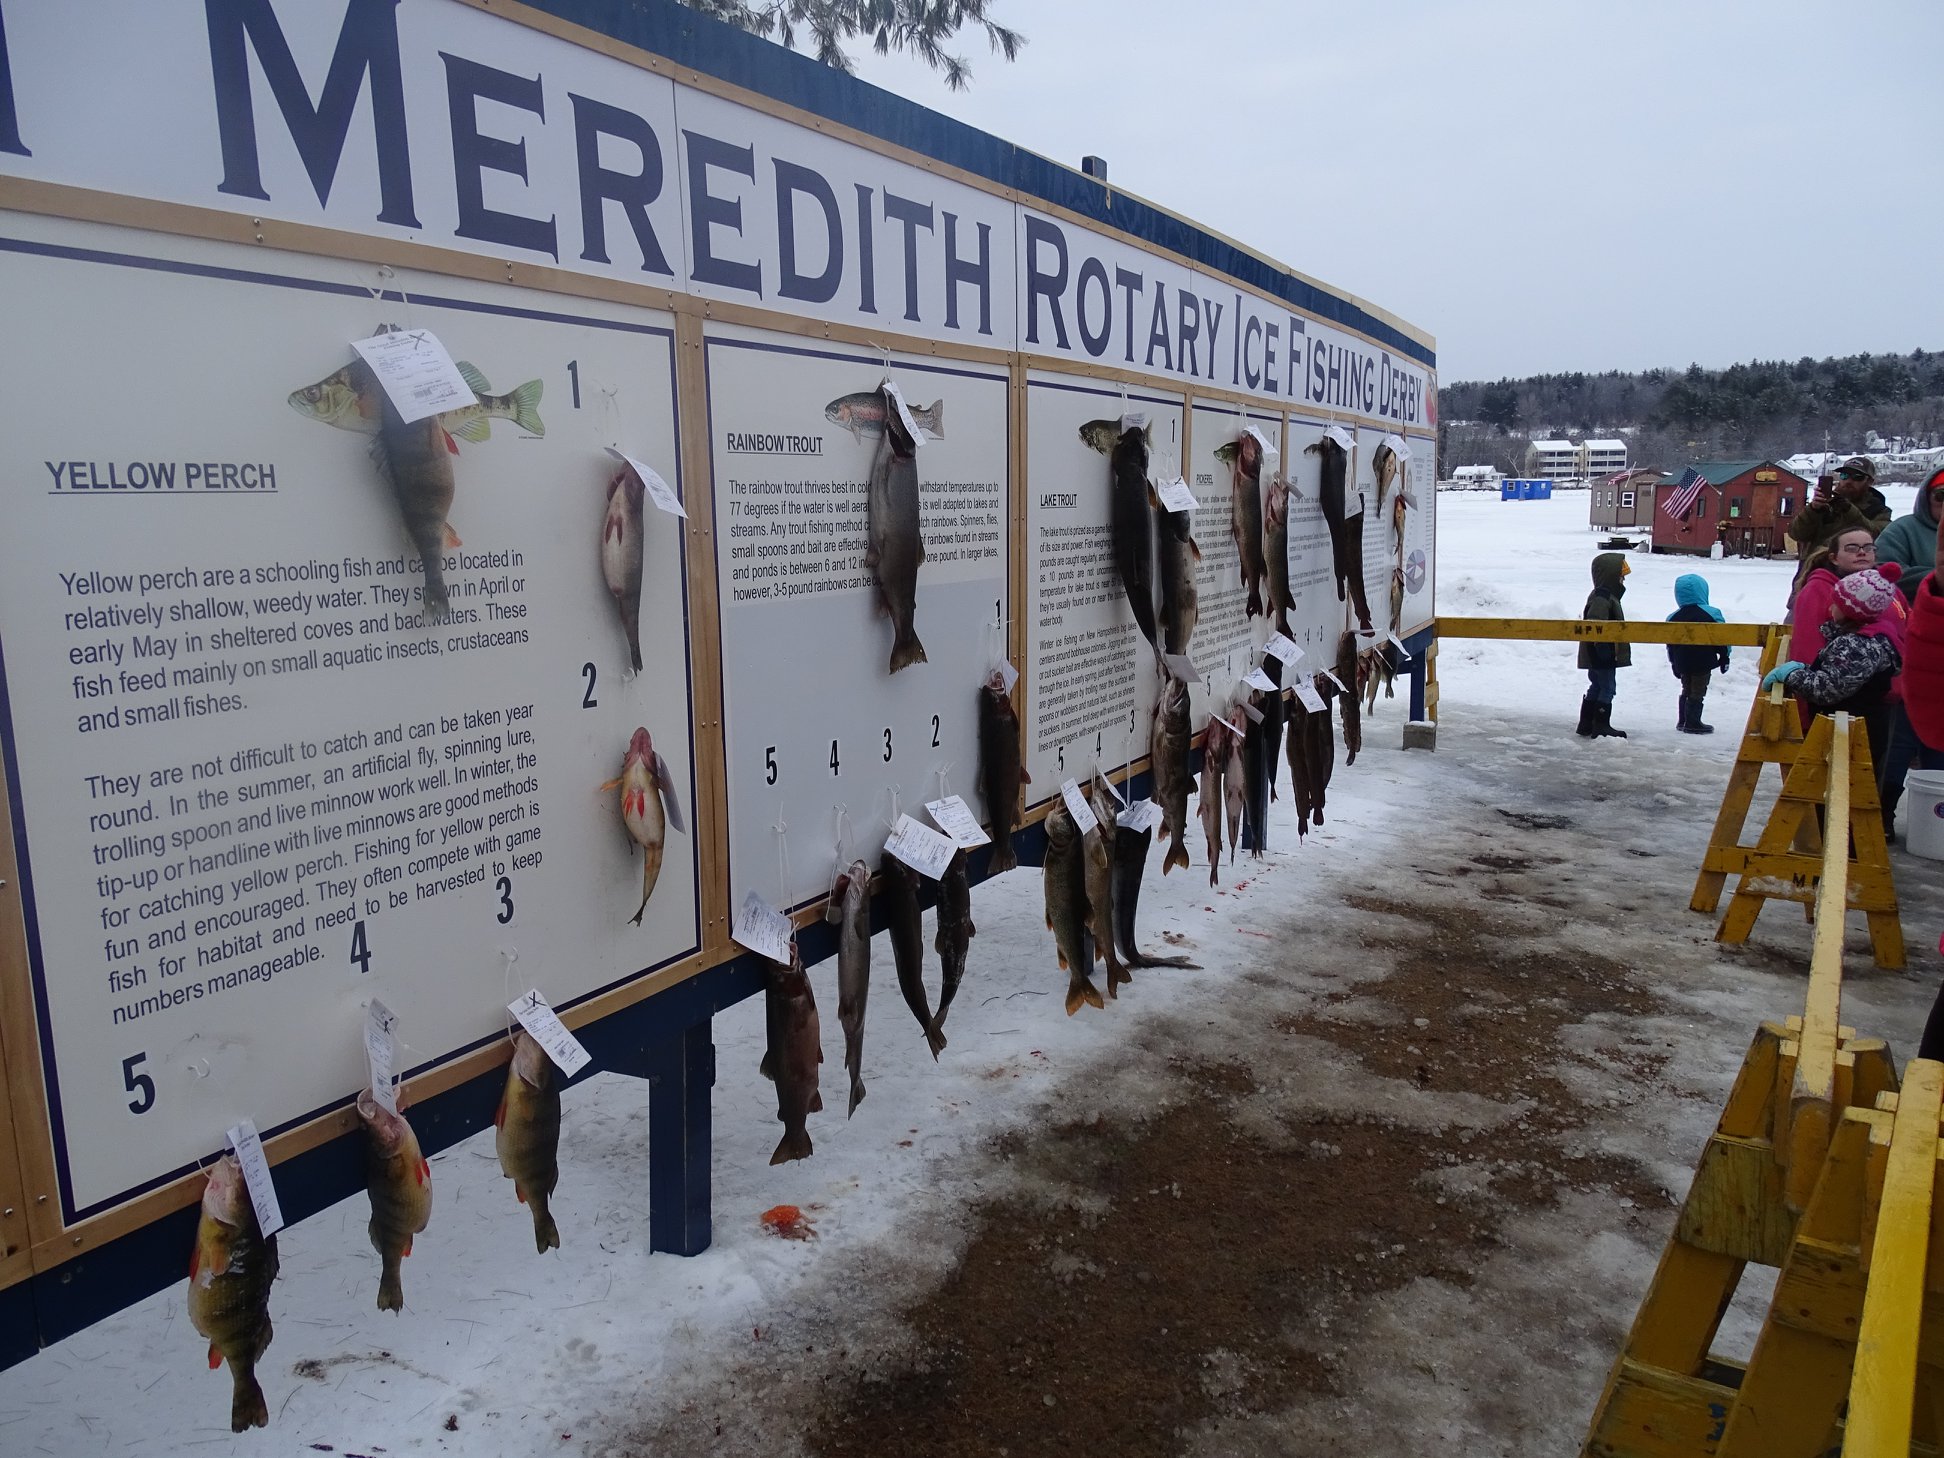 Join Us at the Great Meredith Rotary Ice Fishing Derby February 1213